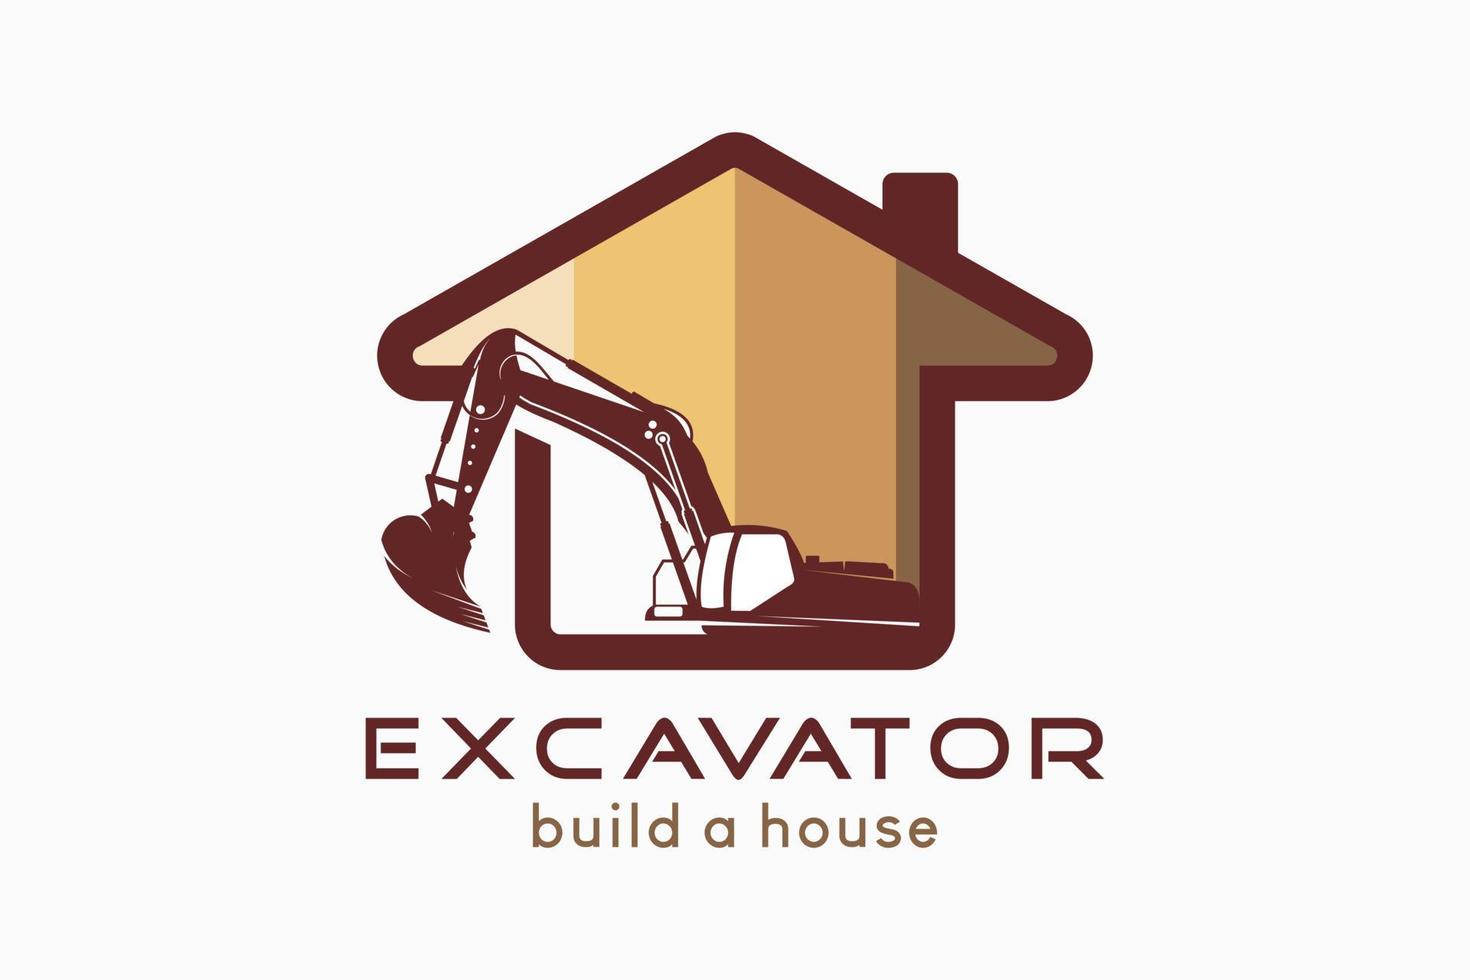 Excavator logo design with an excavator silhouette combined with a house icon, vector illustration of an excavator building a house with a creative concept.